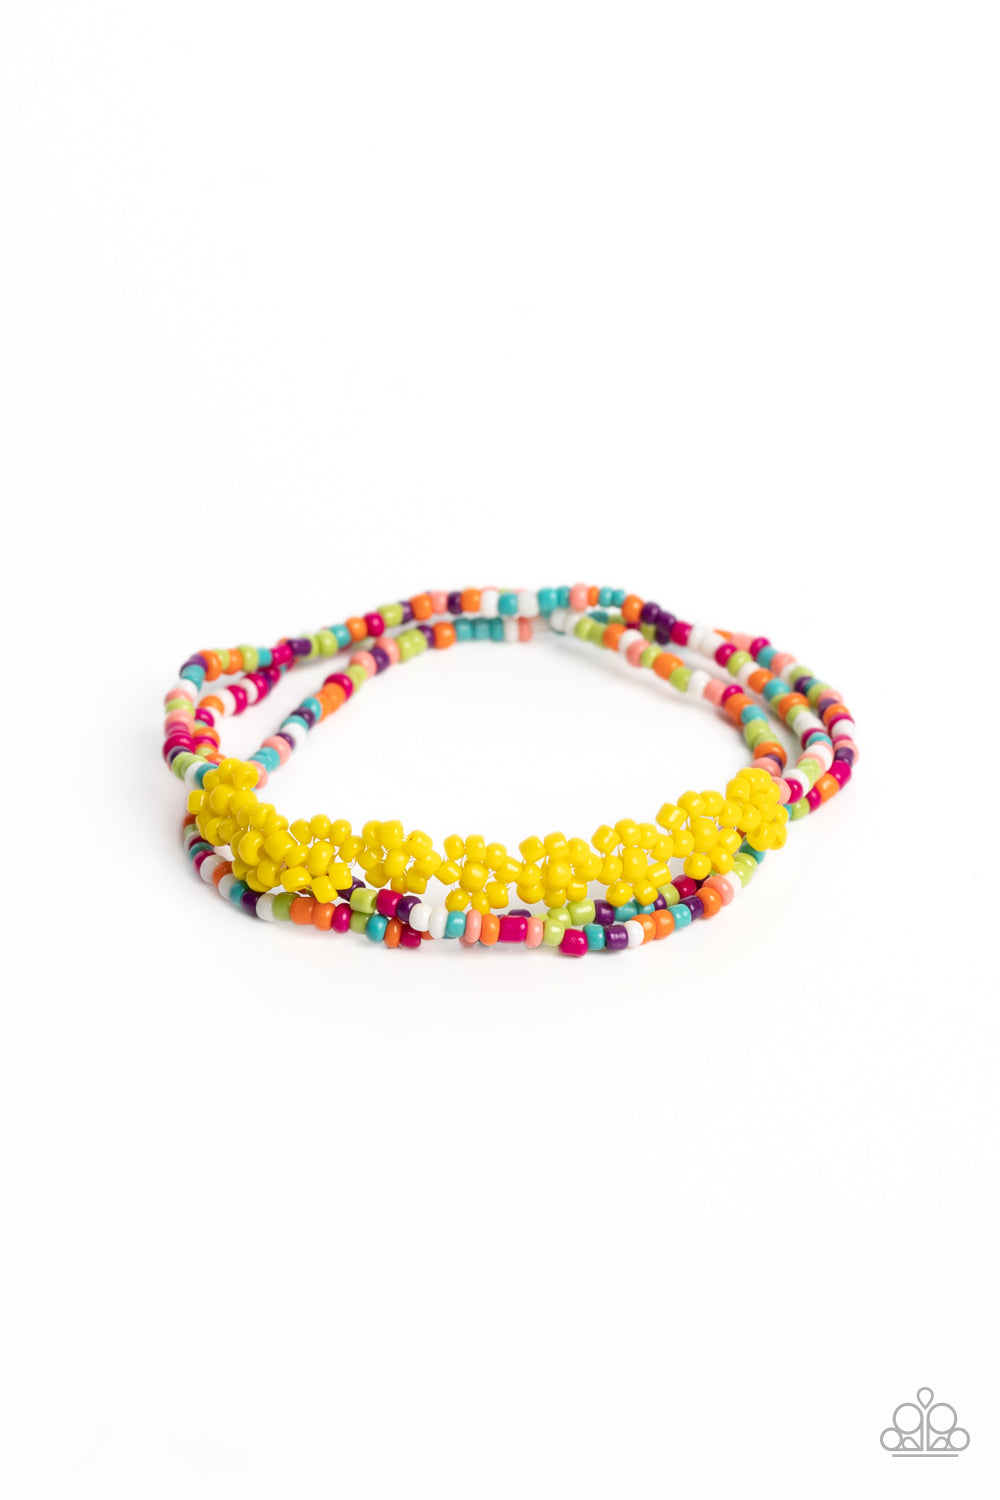 Buzzworthy Botanicals Multi Bracelet - Paparazzi Accessories  Strung along the entirety of three elastic stretchy bands, multicolored seed beads, in shades of pink, purple, blue, orange, white, and green coalesce around the wrist. Featured on one of the multicolored bands, blooming yellow seed bead flowers, with yellow seed bead centers haphazardly interrupt the refreshing collection for a carefree, charismatic finish.  Sold as one individual bracelet.  P9DA-MTXX-050XX